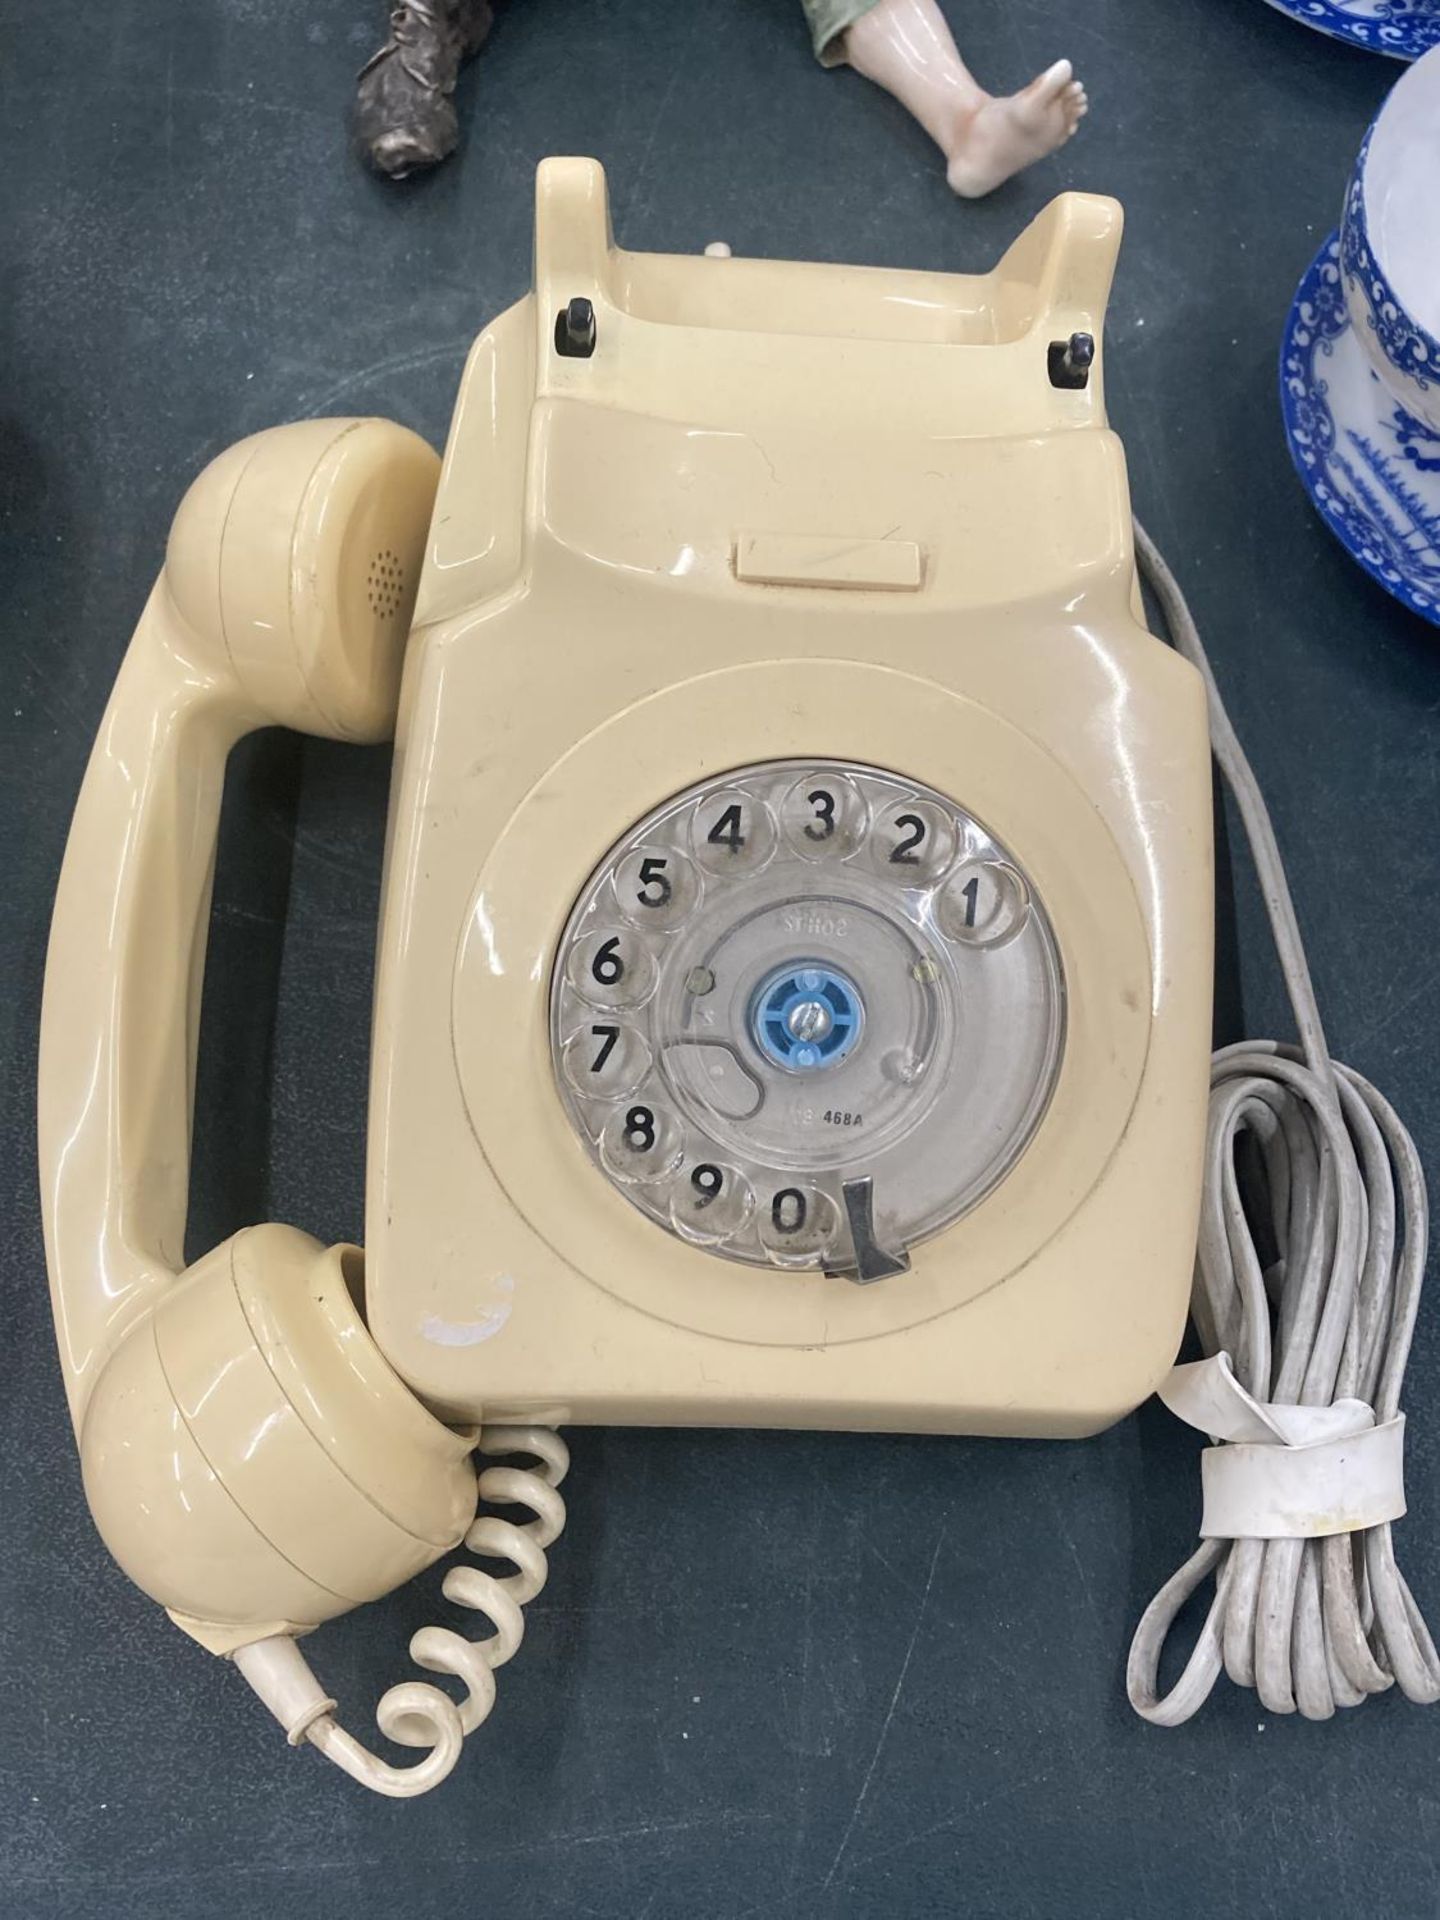 A VINTAGE CREAM ROTARY DIAL TELEPHONE - Image 2 of 3